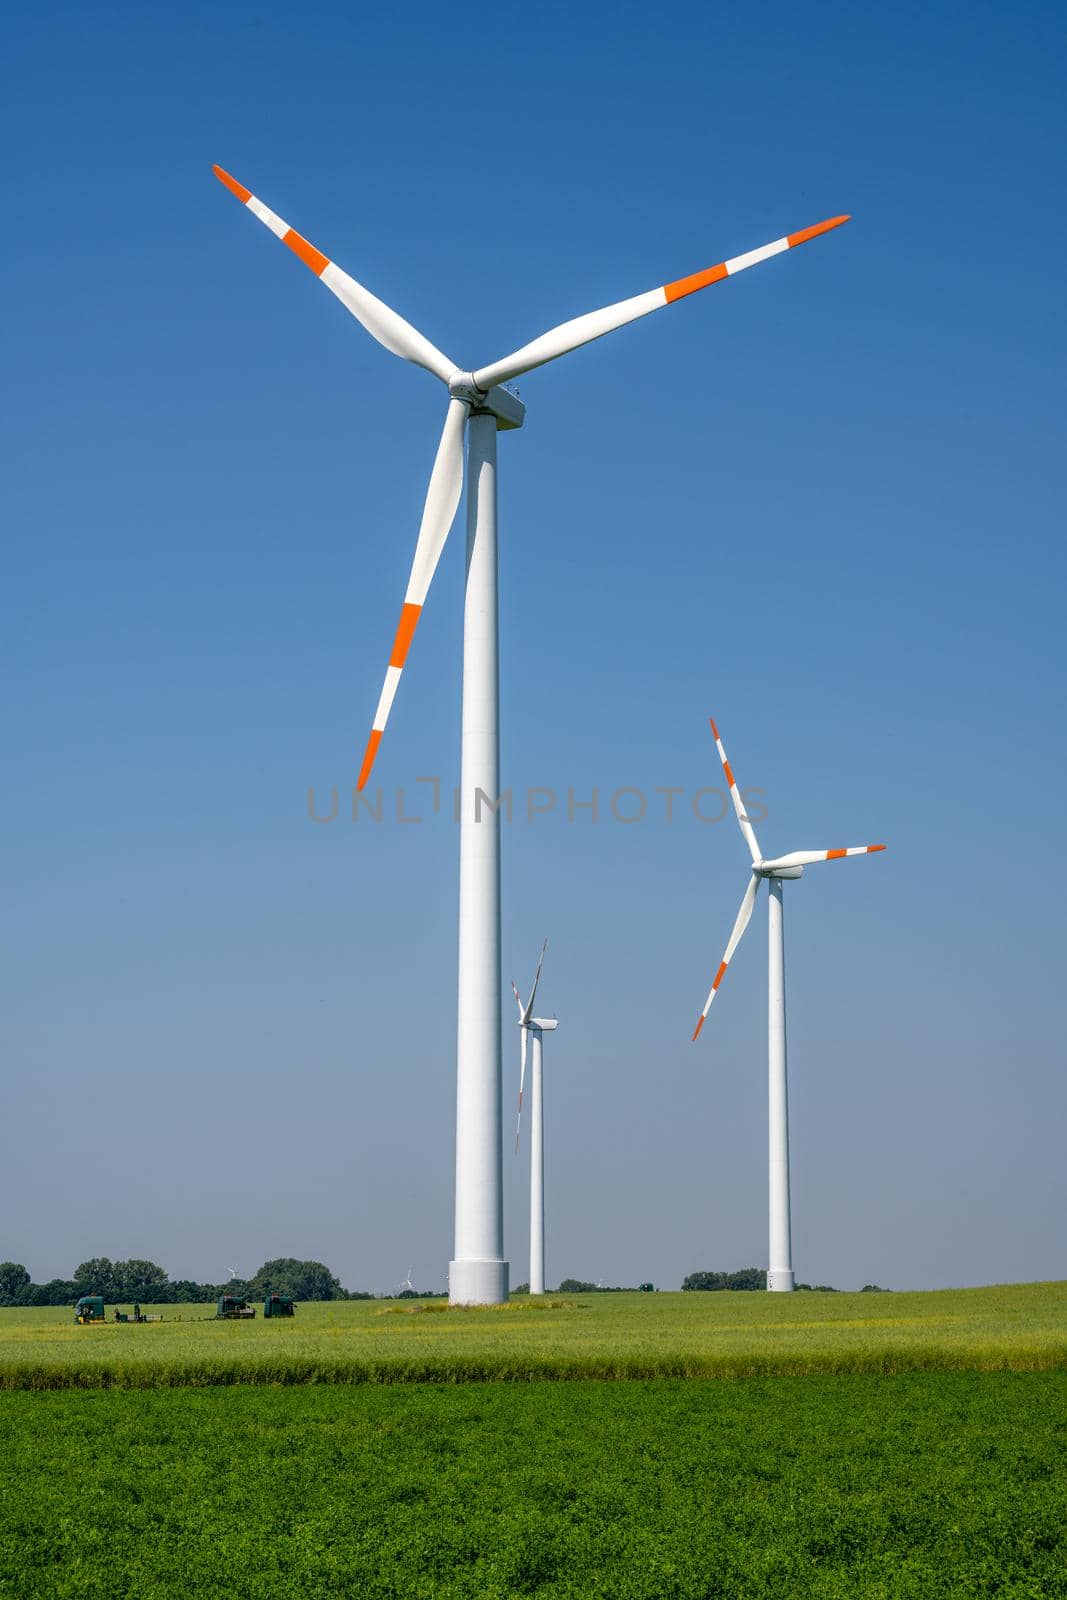 Modern wind turbines on a sunny day seen in Germany